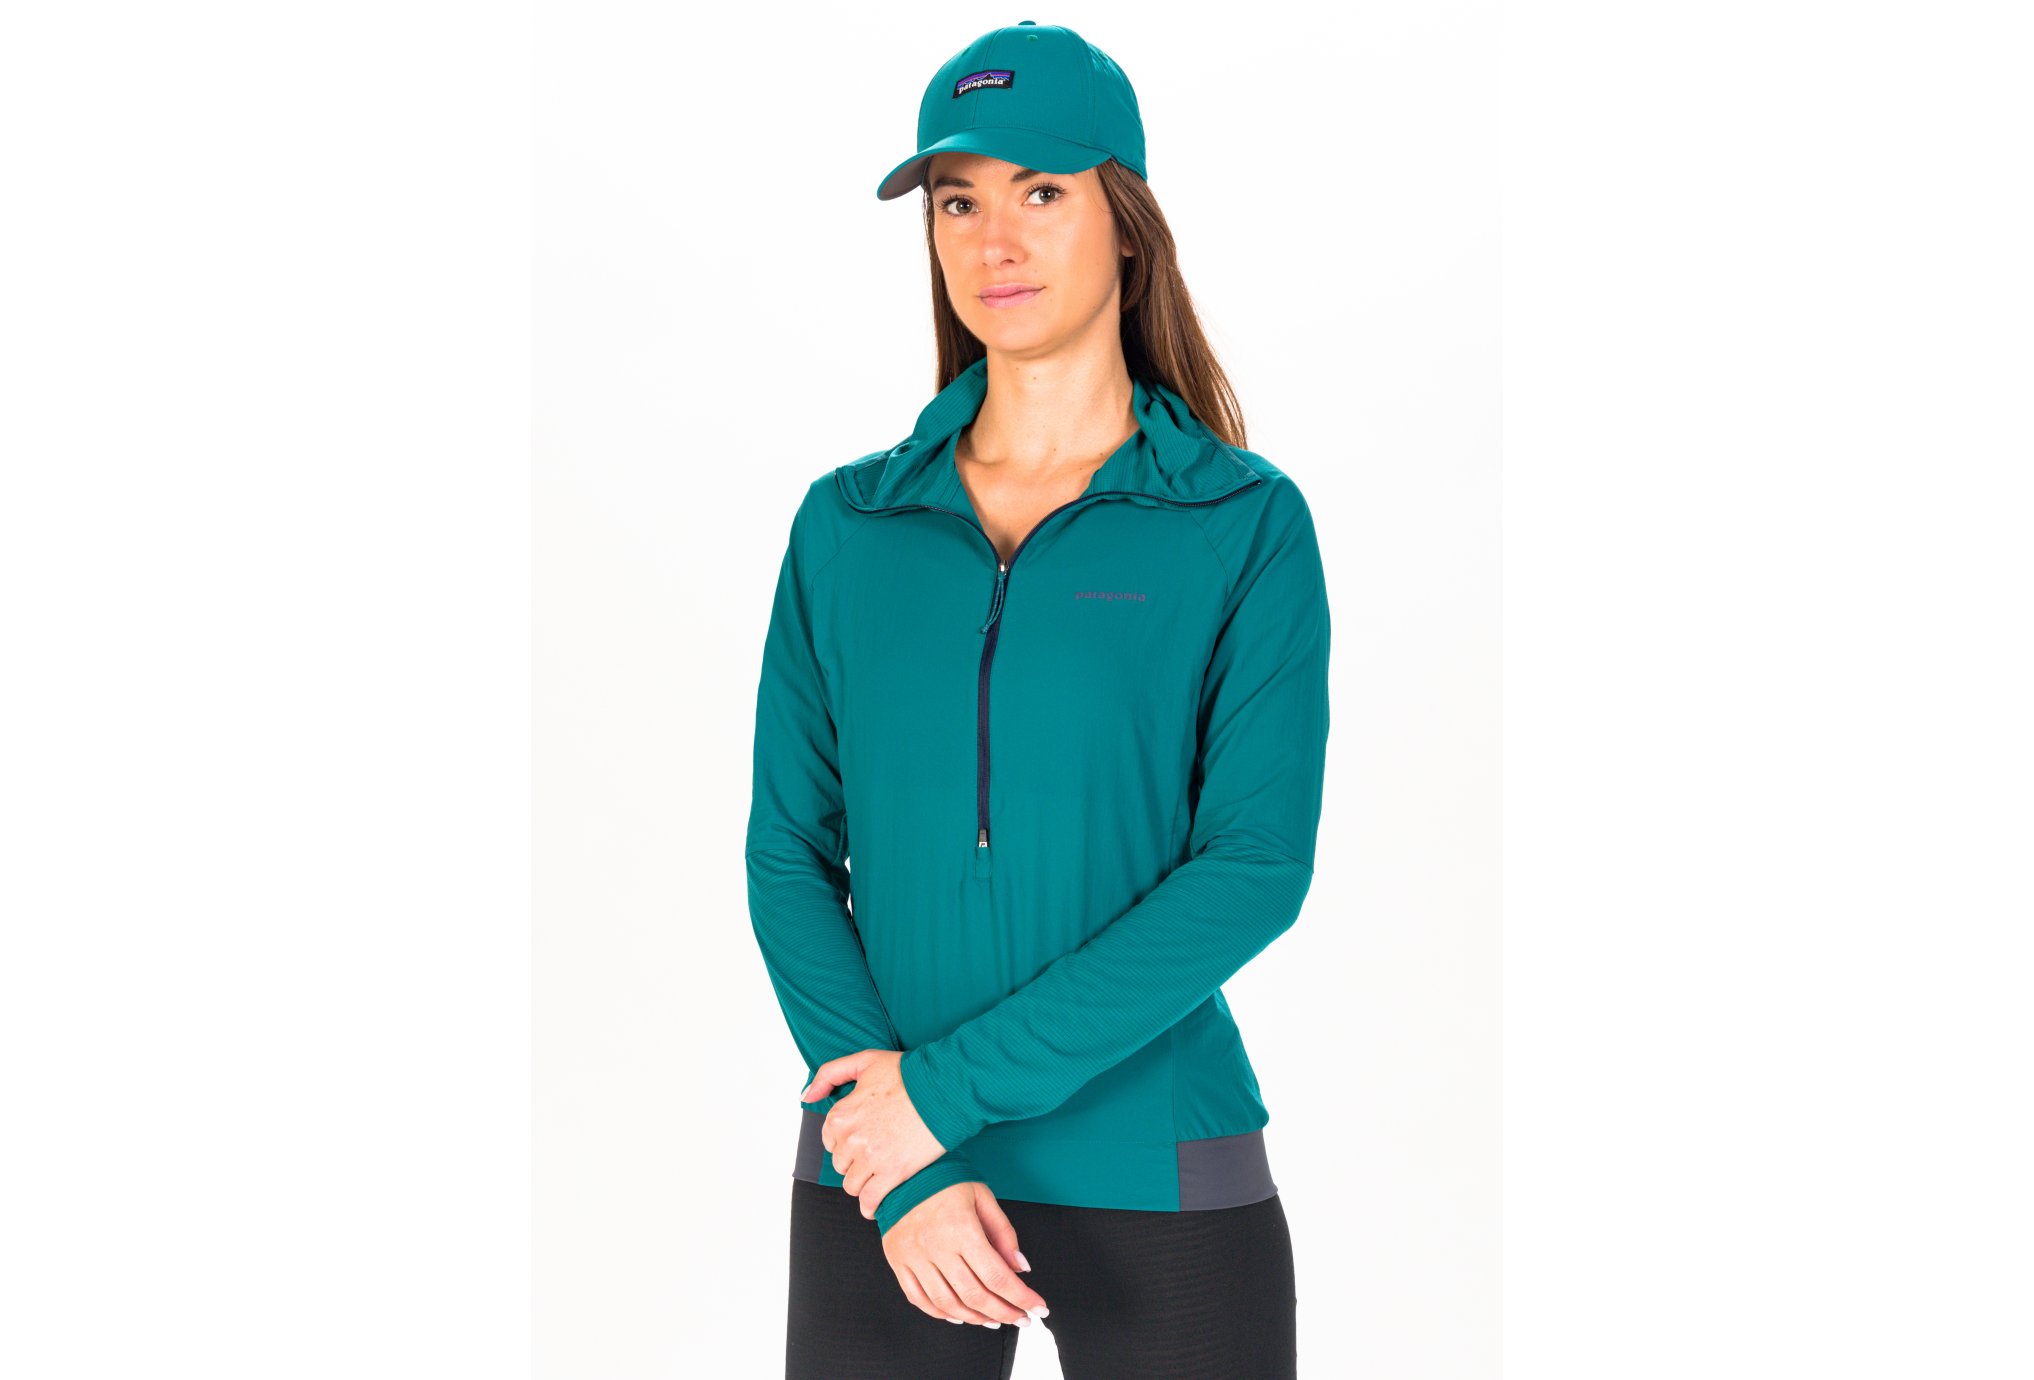 Patagonia Airshed Pro W vêtement running femme